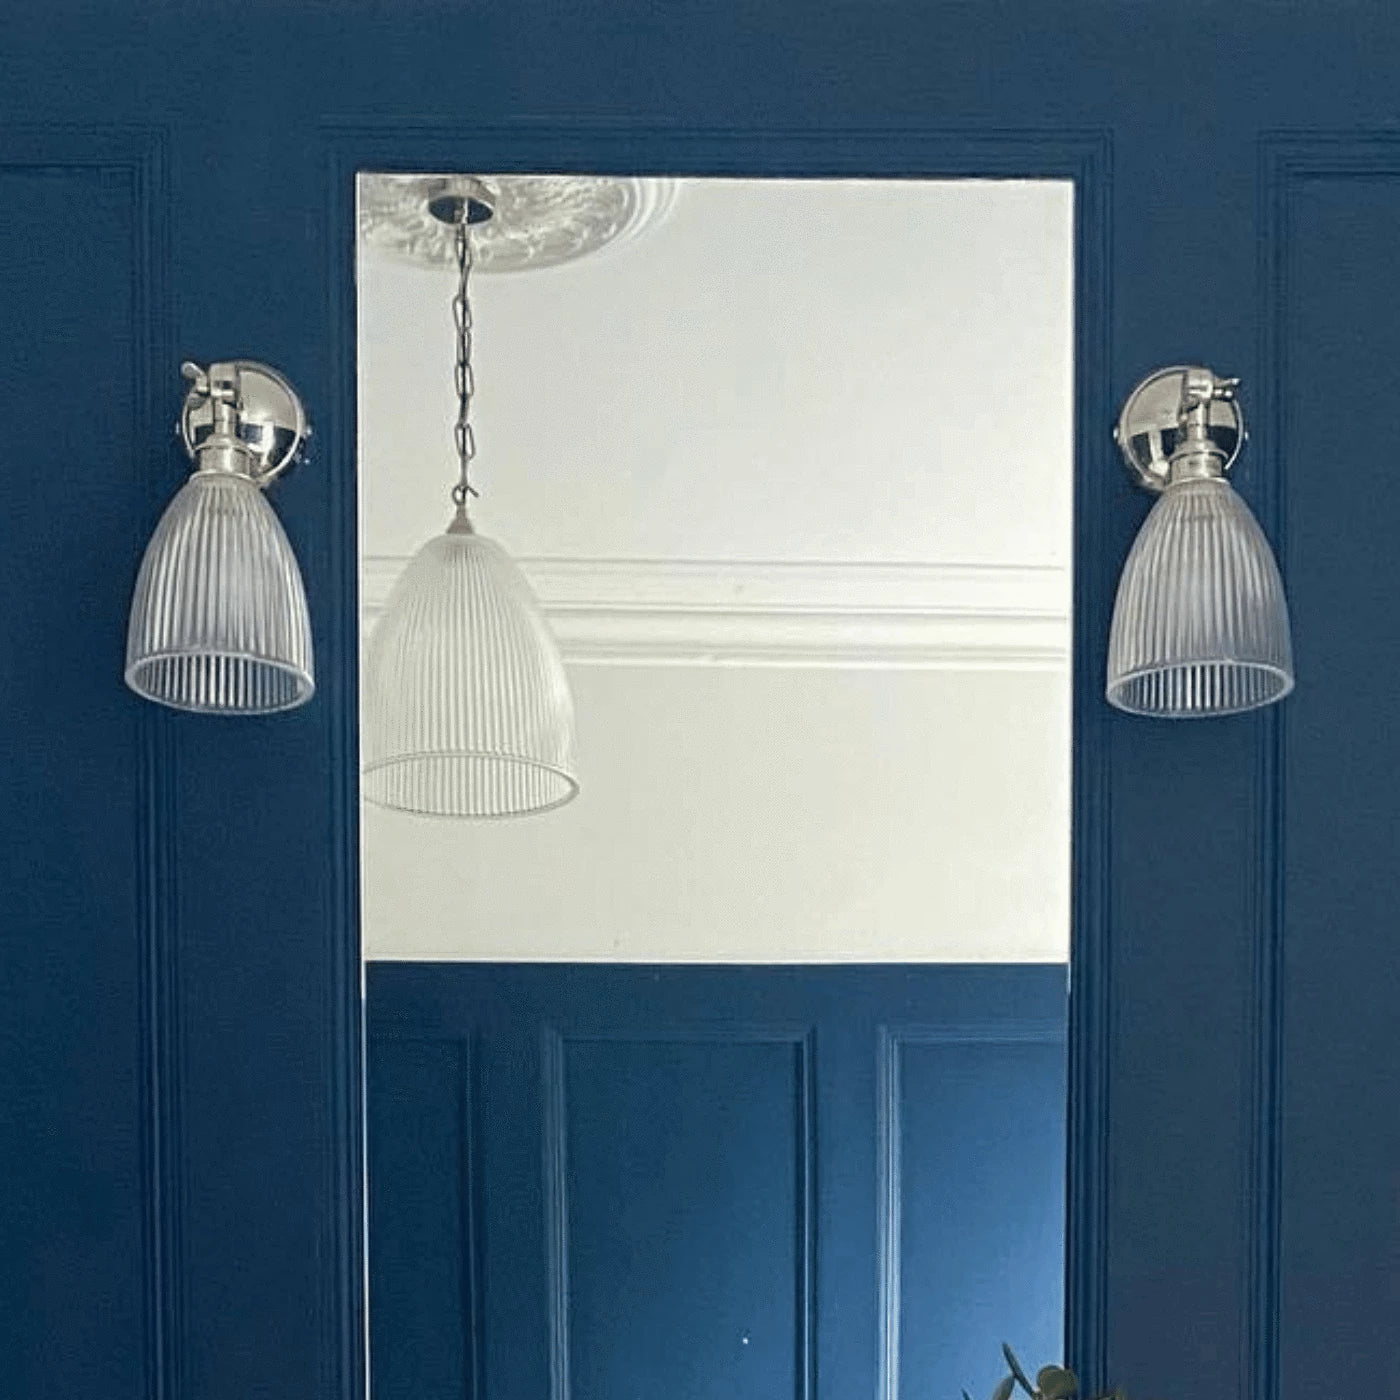 Image showing a wall light in a bathroom